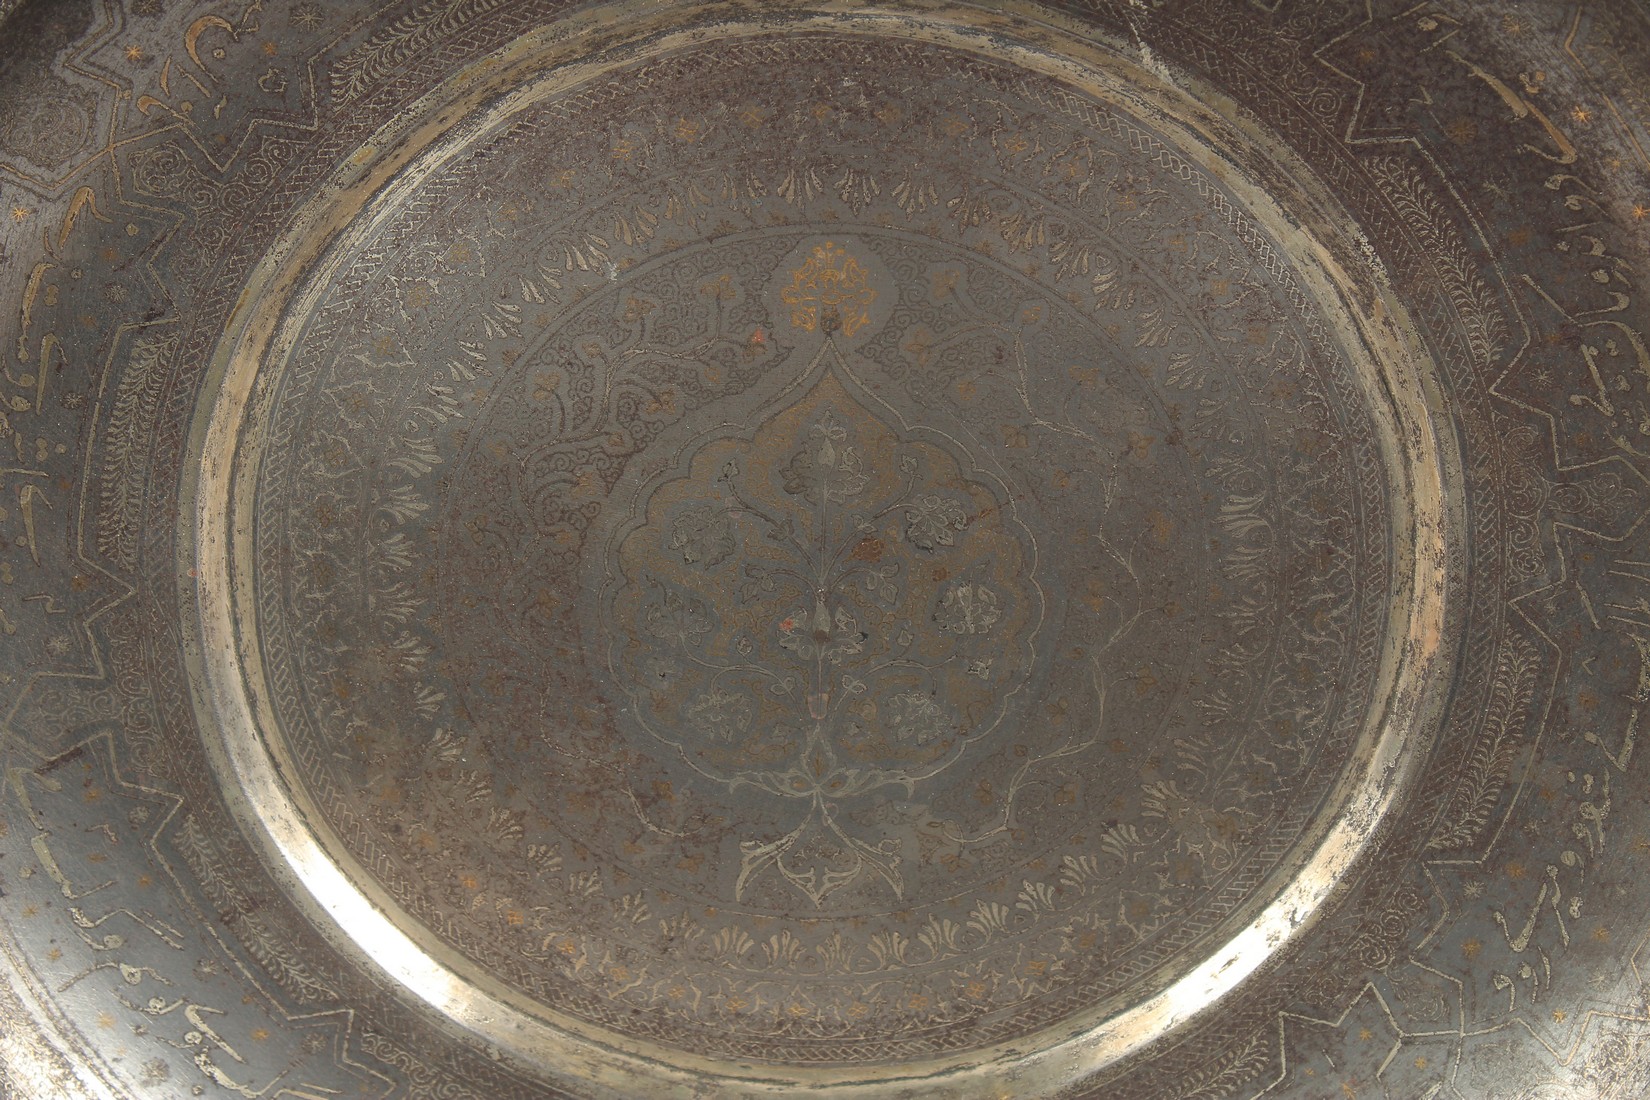 A VERY LARGE AND FINE 19TH CENTURY NORTH INDIAN SIALKOT KOFTGARI SILVER AND GOLD INLAID STEEL - Image 2 of 3